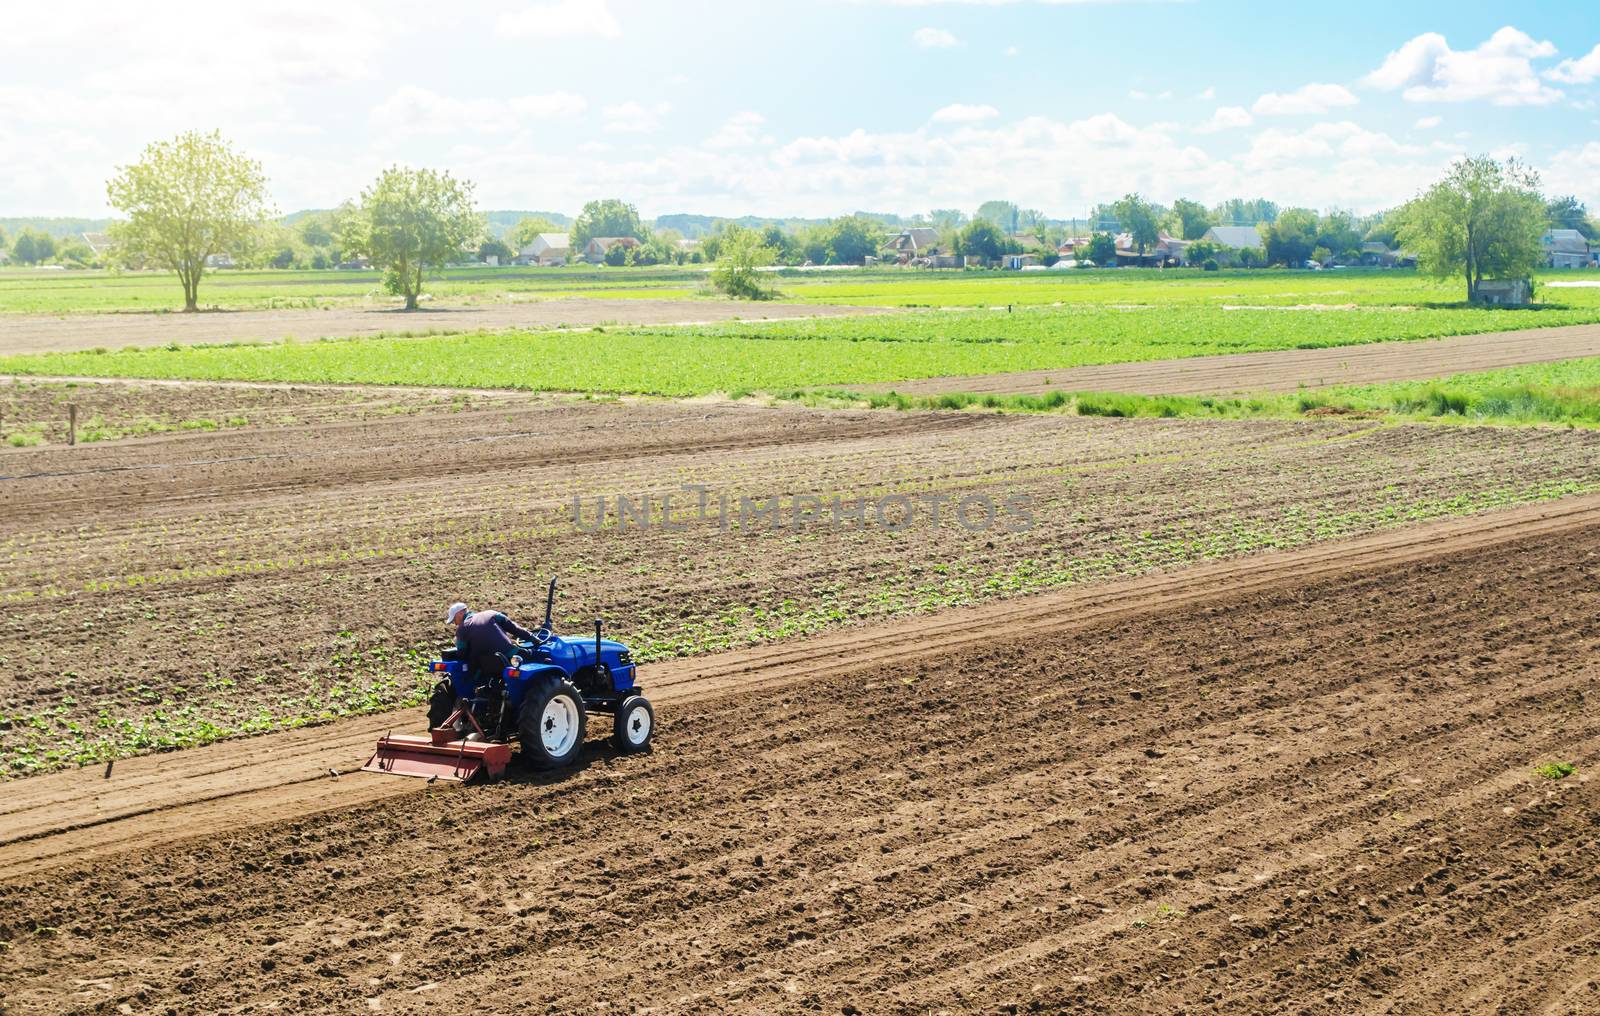 A farmer on a tractor cultivates a farm field. Field preparation for new crop planting. Cultivation equipment. Grinding and loosening soil, removing plants and roots from past harvest. Farm landscape by iLixe48